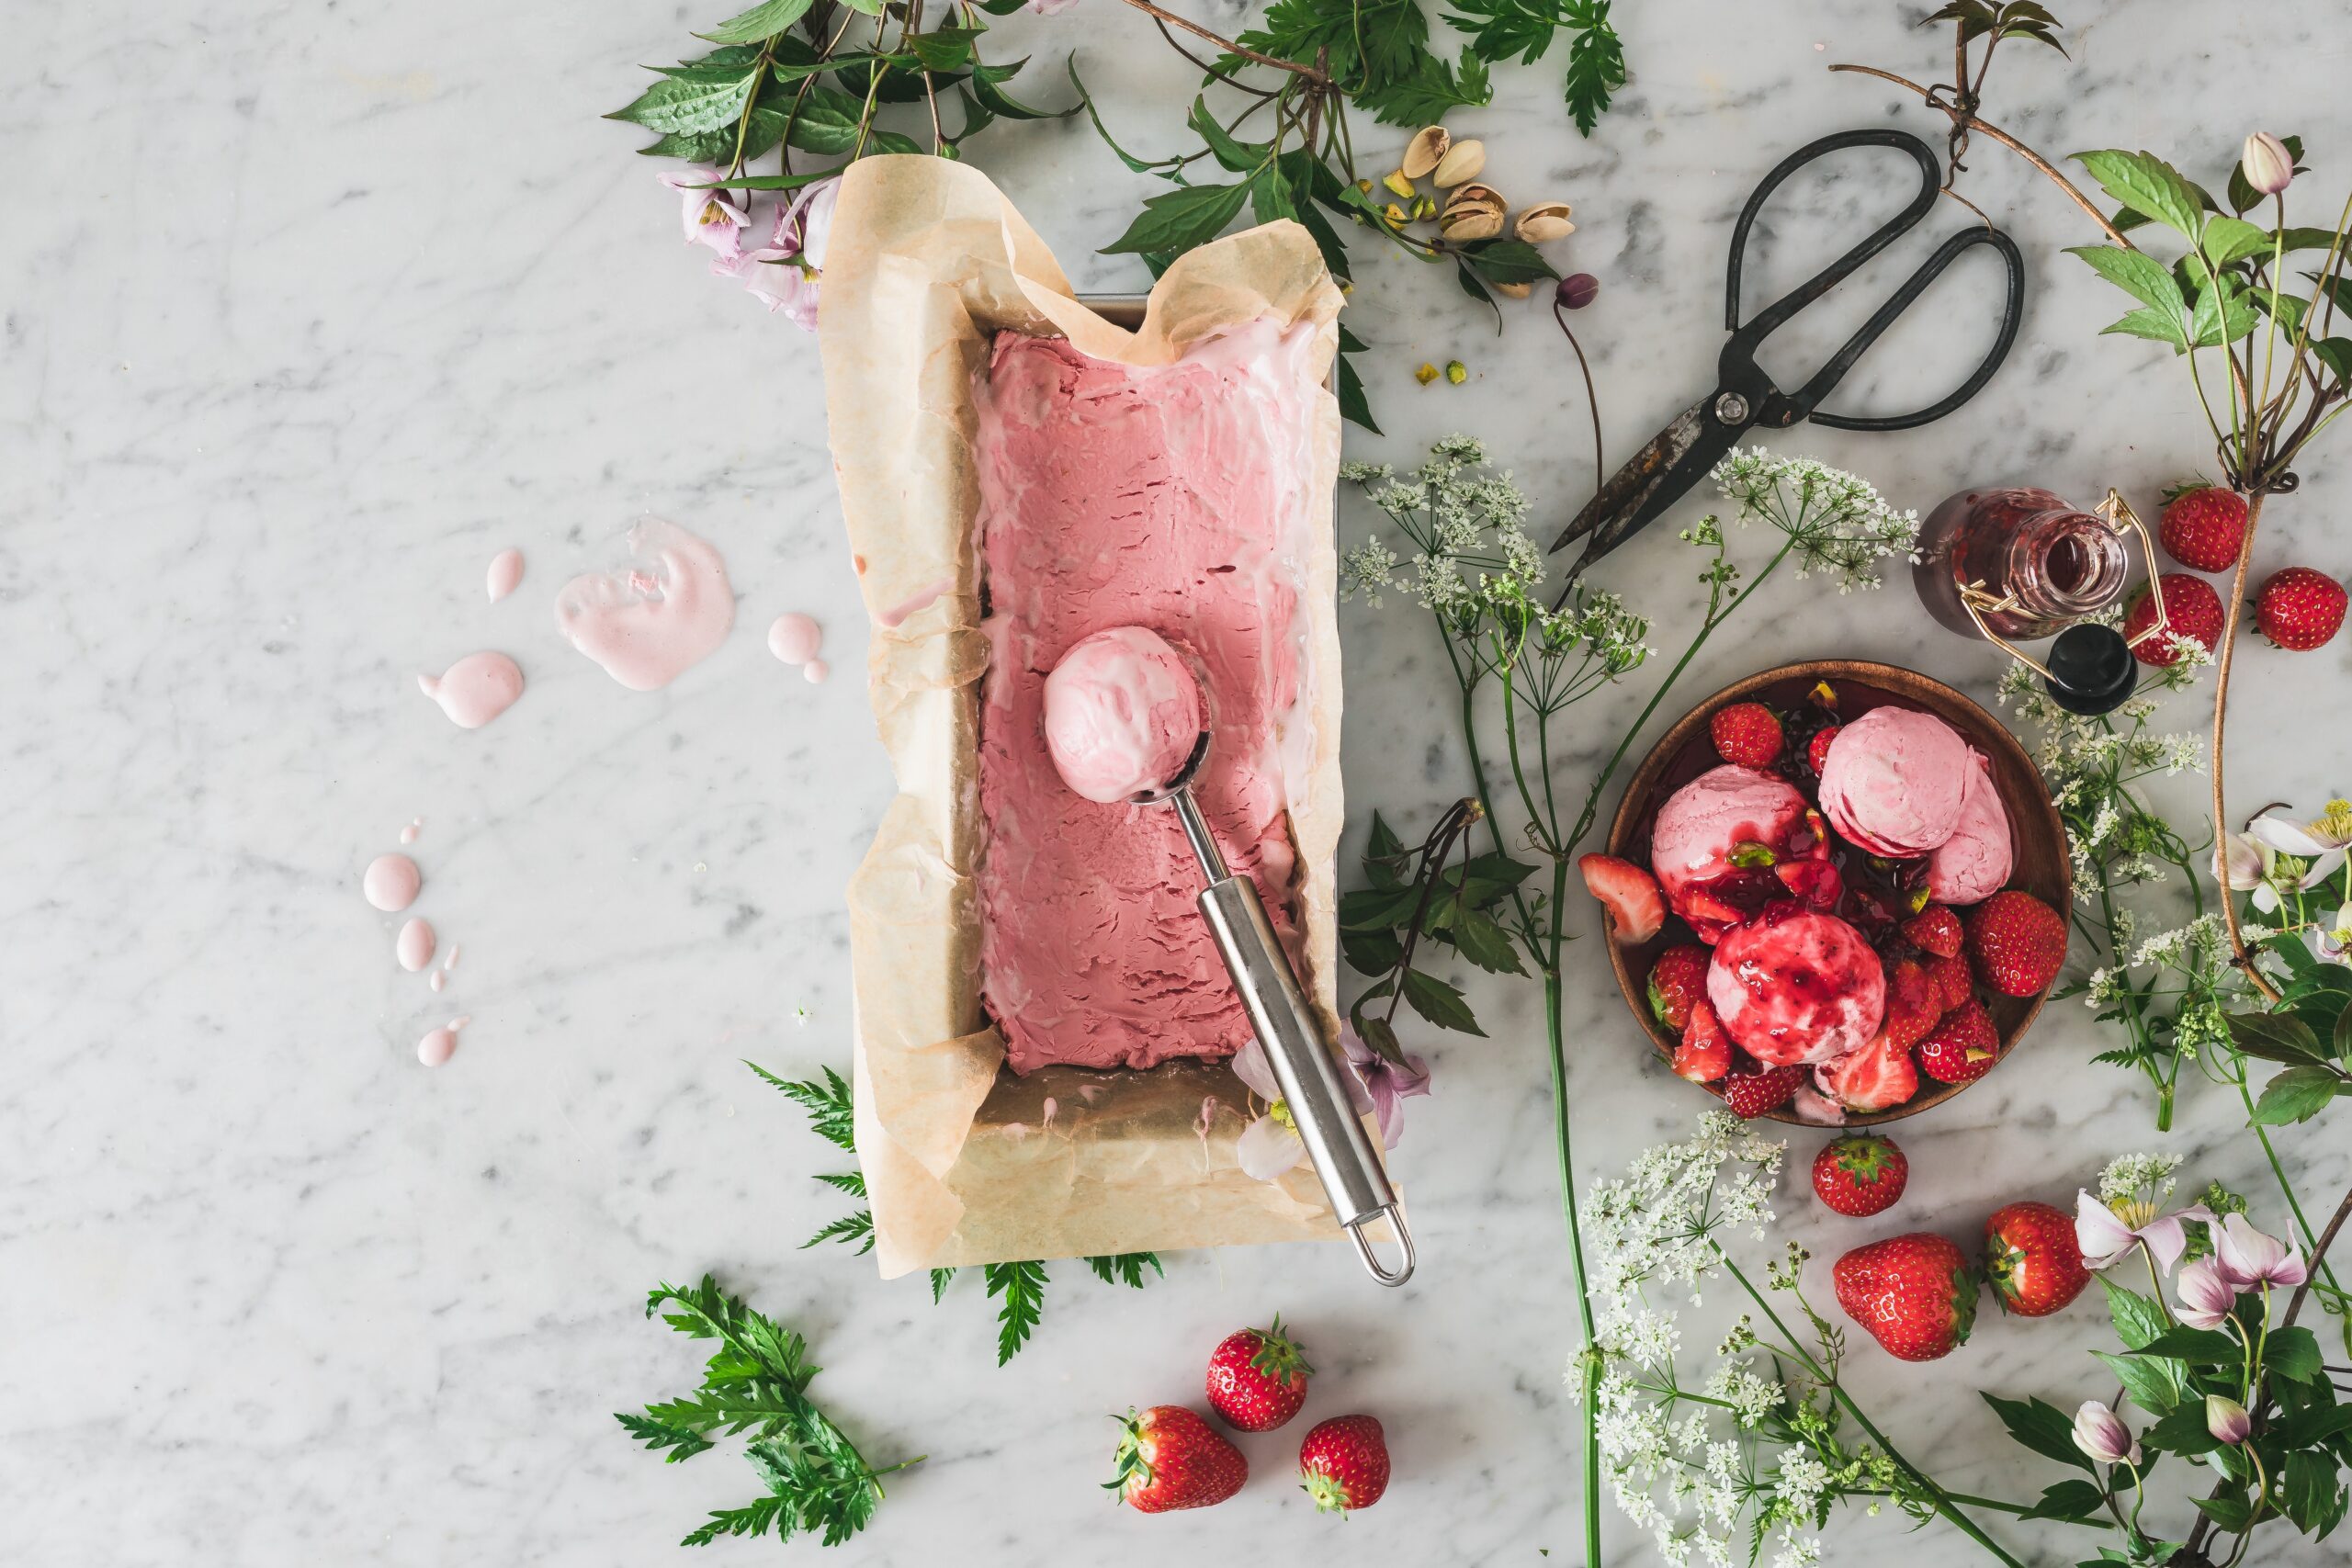 a healthy homemade ice cream made with coconut milk and strawberries